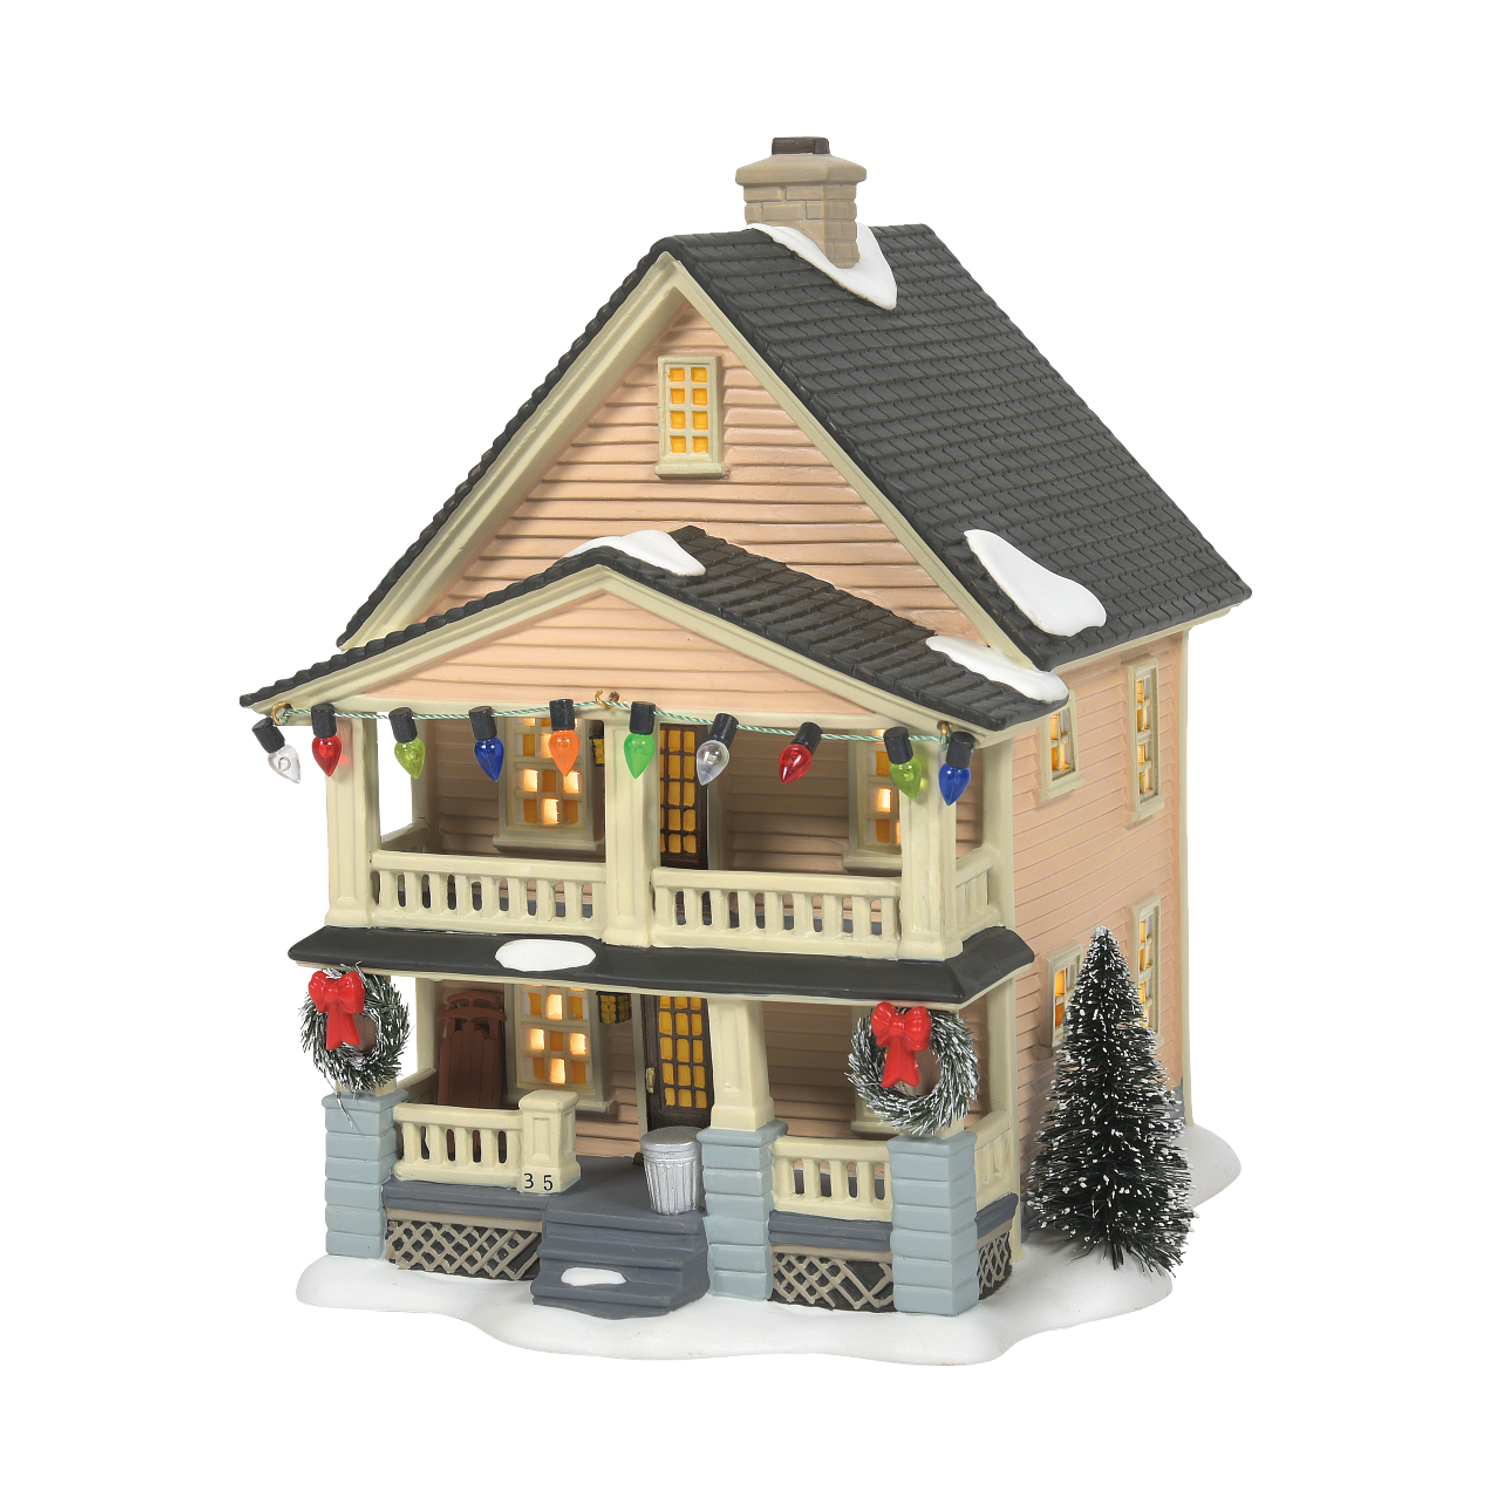 Department 56 A Christmas Story Village Ralphie's House 4029245